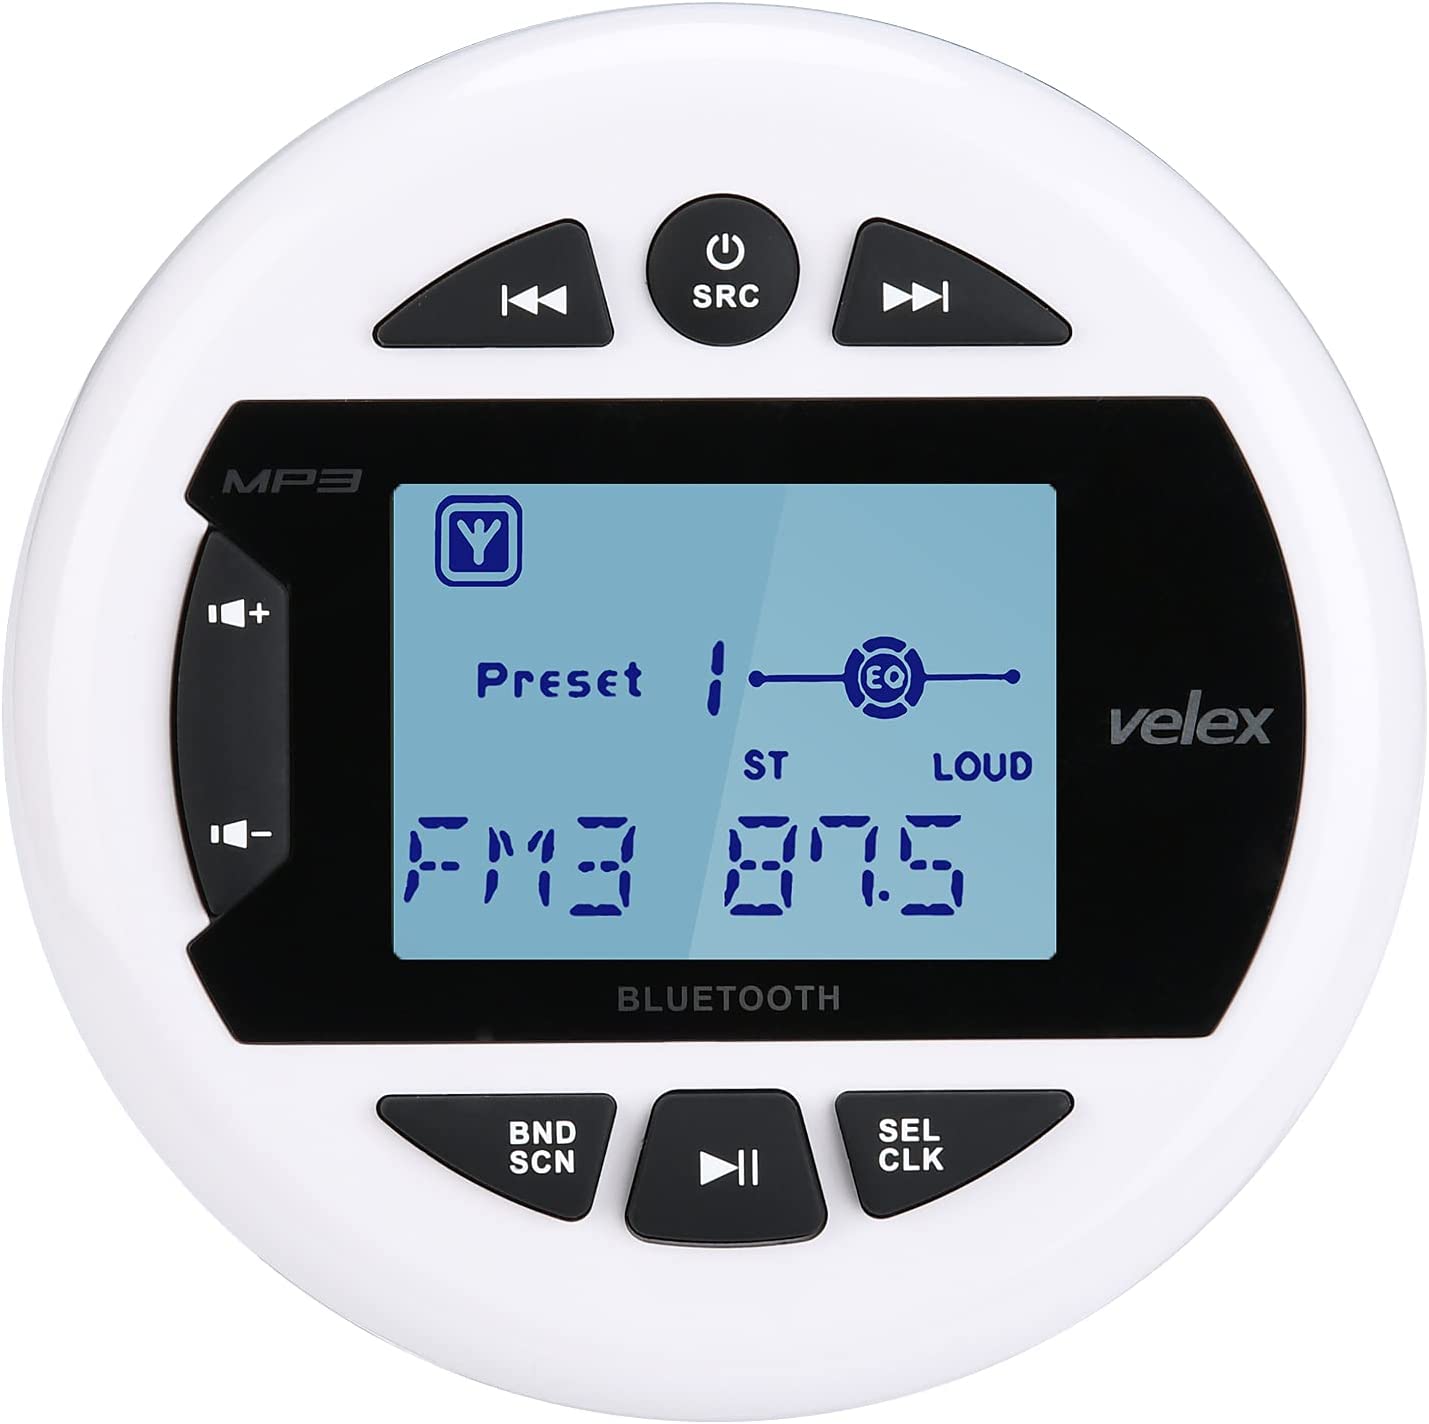 Velex Water Resistant Gauge Multimedia Player, Receiver, with Audio Streaming, 2.4" Positive Display